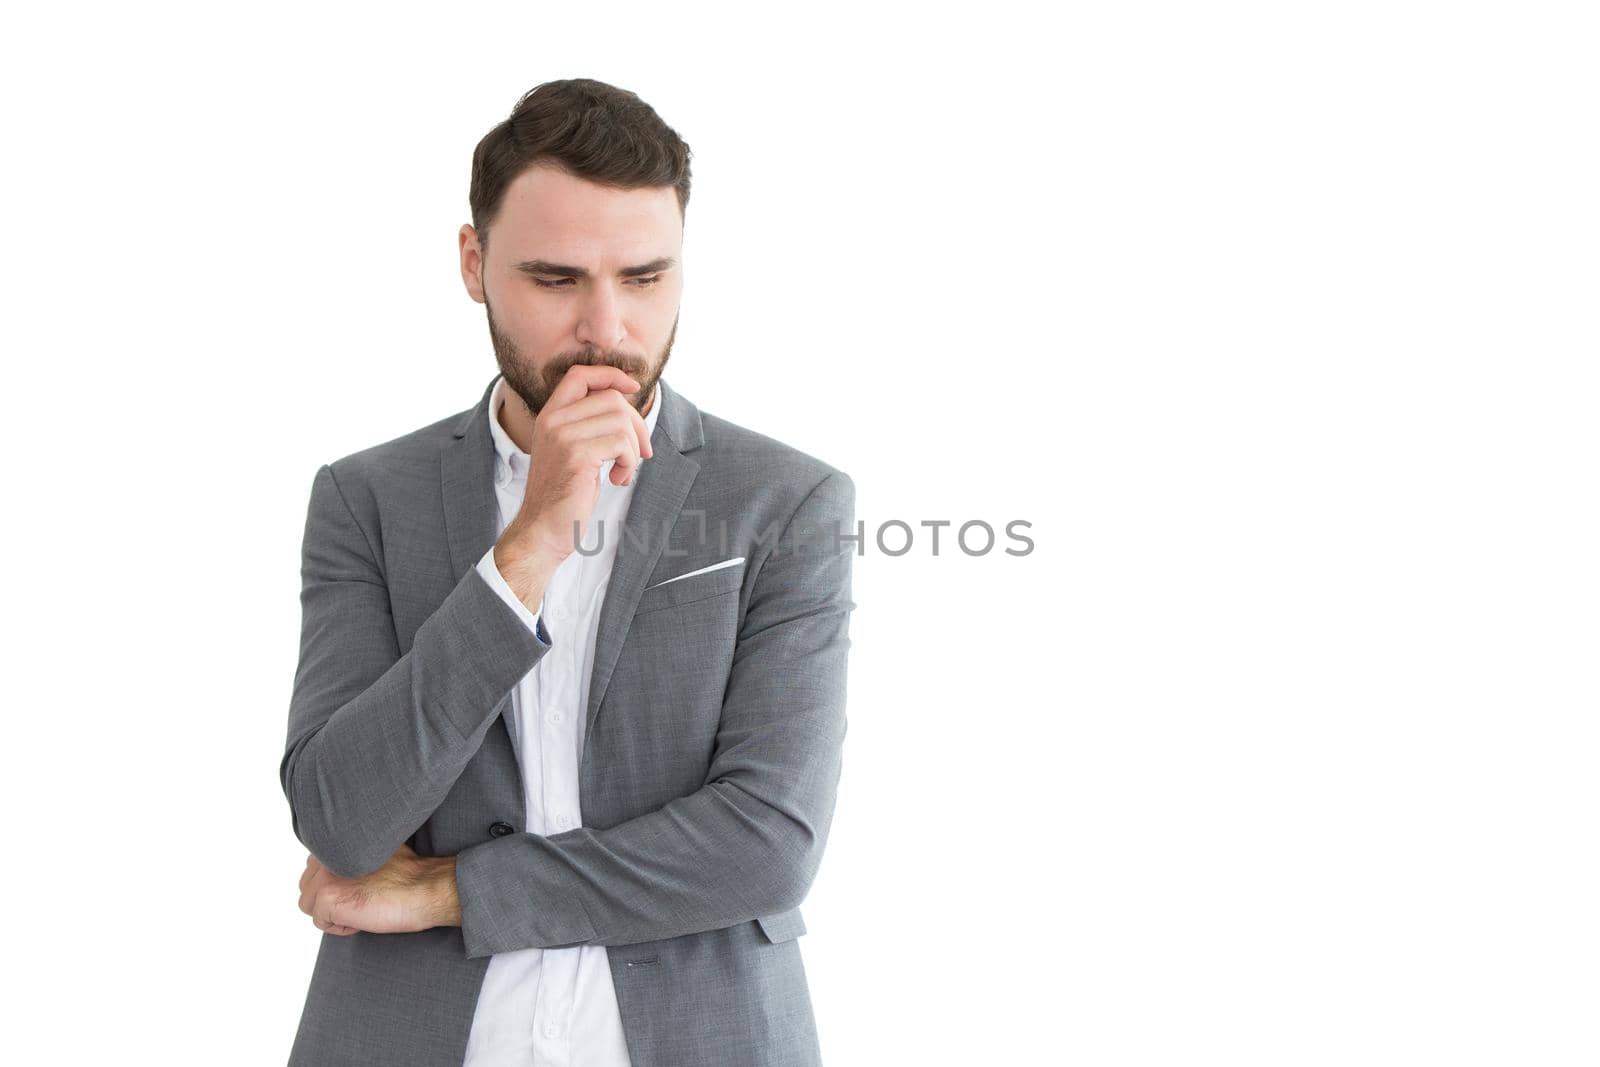 Business man thinking stress or consider make a decision posture isolated on white background. male forget mistake hesitate expression.